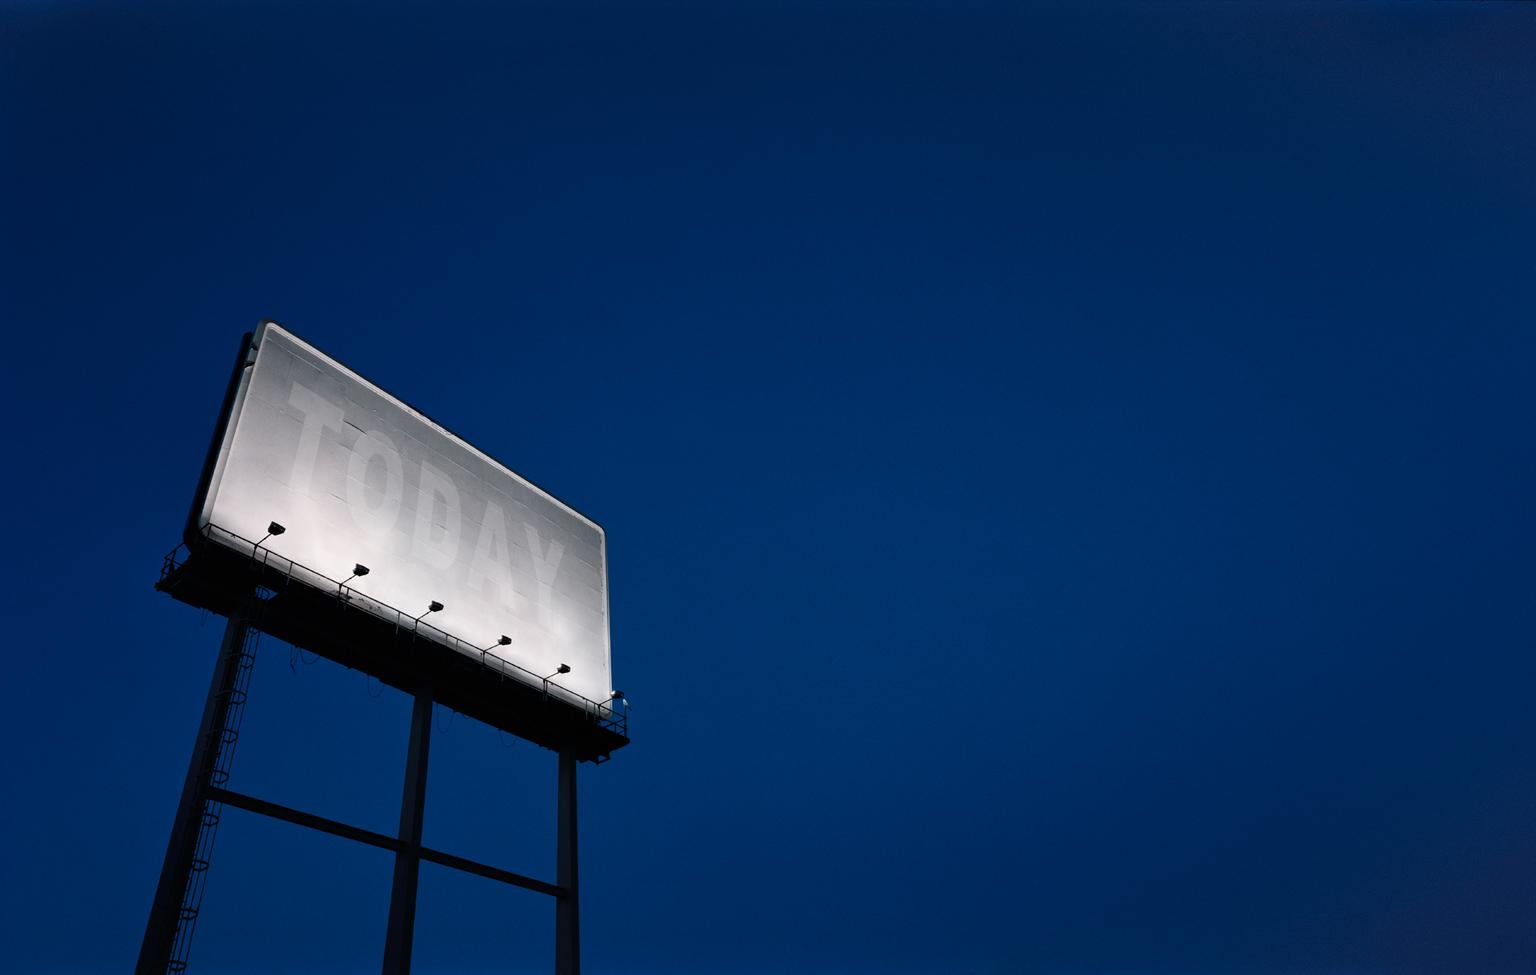 Frank Schott Color Photograph - TODAY - large format photograph of conceptual motivational billboard at night